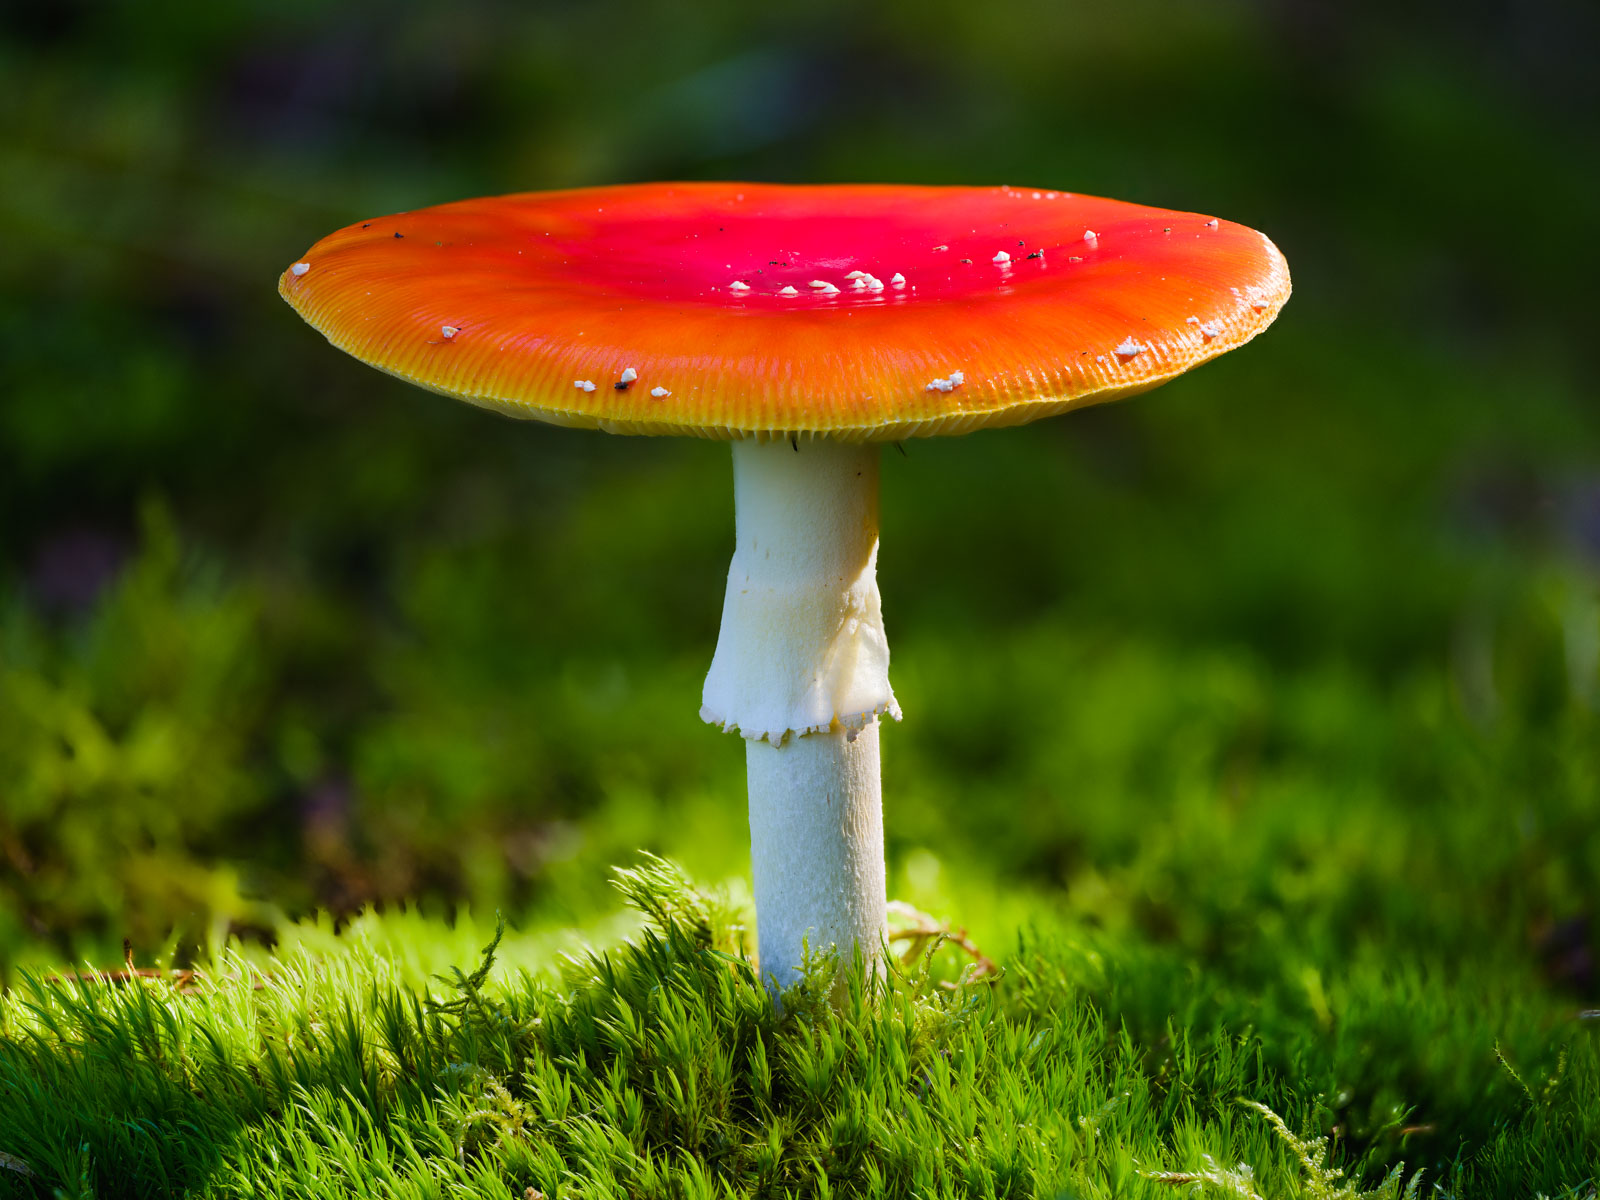 Fly agaric (Amanita muscaria) at the 'Wistinghauser Senne' in September 2020 (Oerlinghausen, Germany).